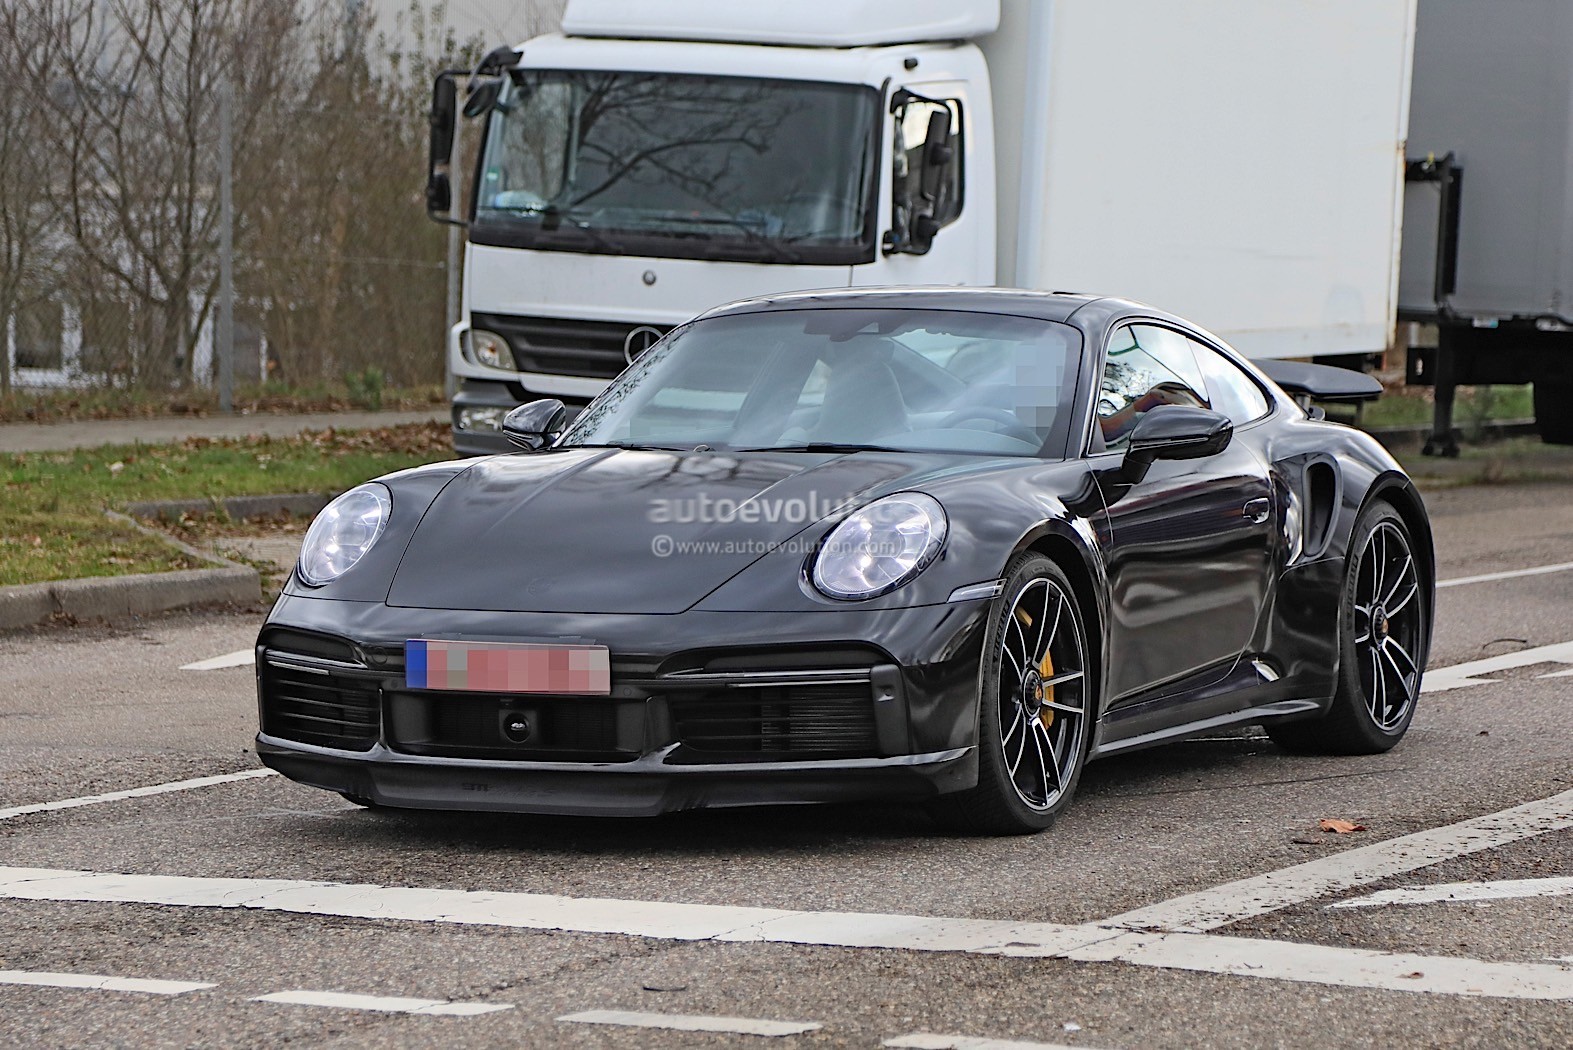 2021 Porsche 911 Turbo S 992 Spied Almost Naked Ahead of 